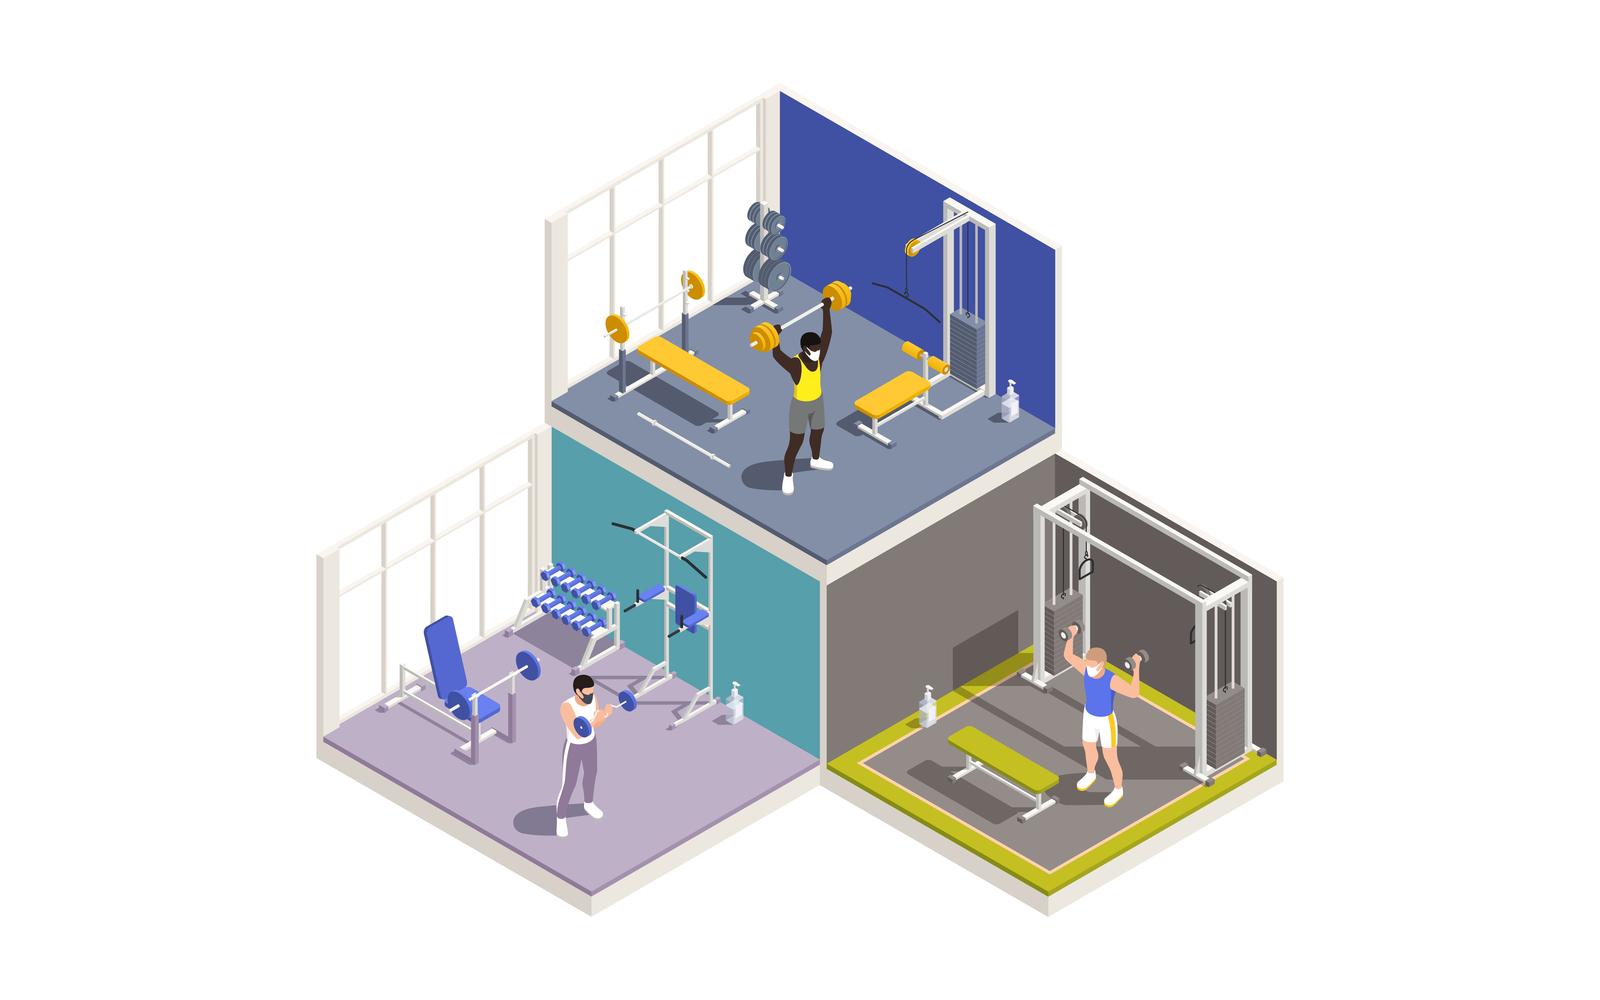 Gym Workout Fitness Isometric 4 Vector Illustration Concept